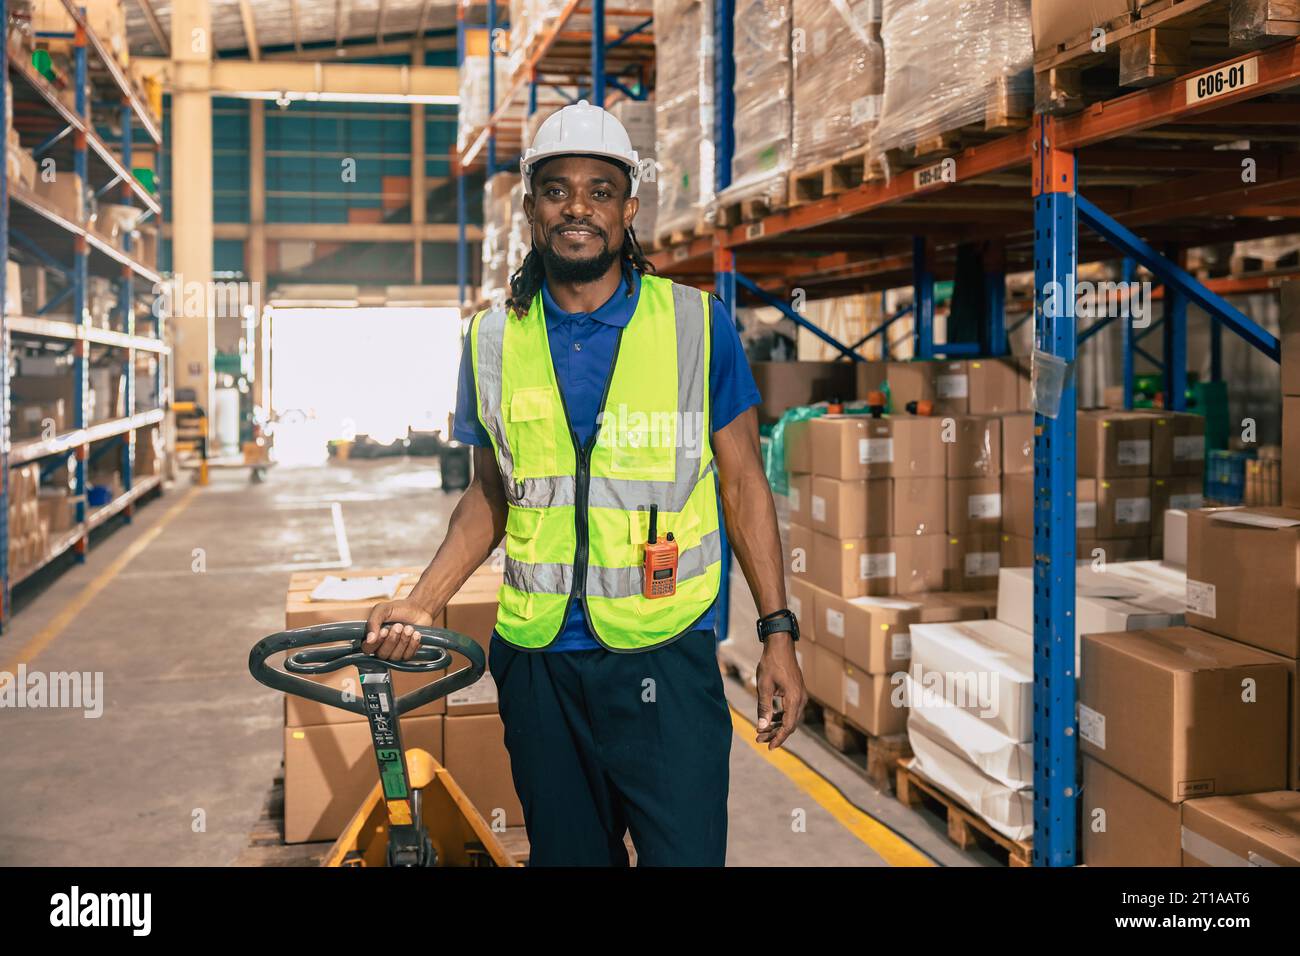 Portrait warehouse parcel delivery African black male staff worker happy working in port cargo shipping industry with safety suit Stock Photo